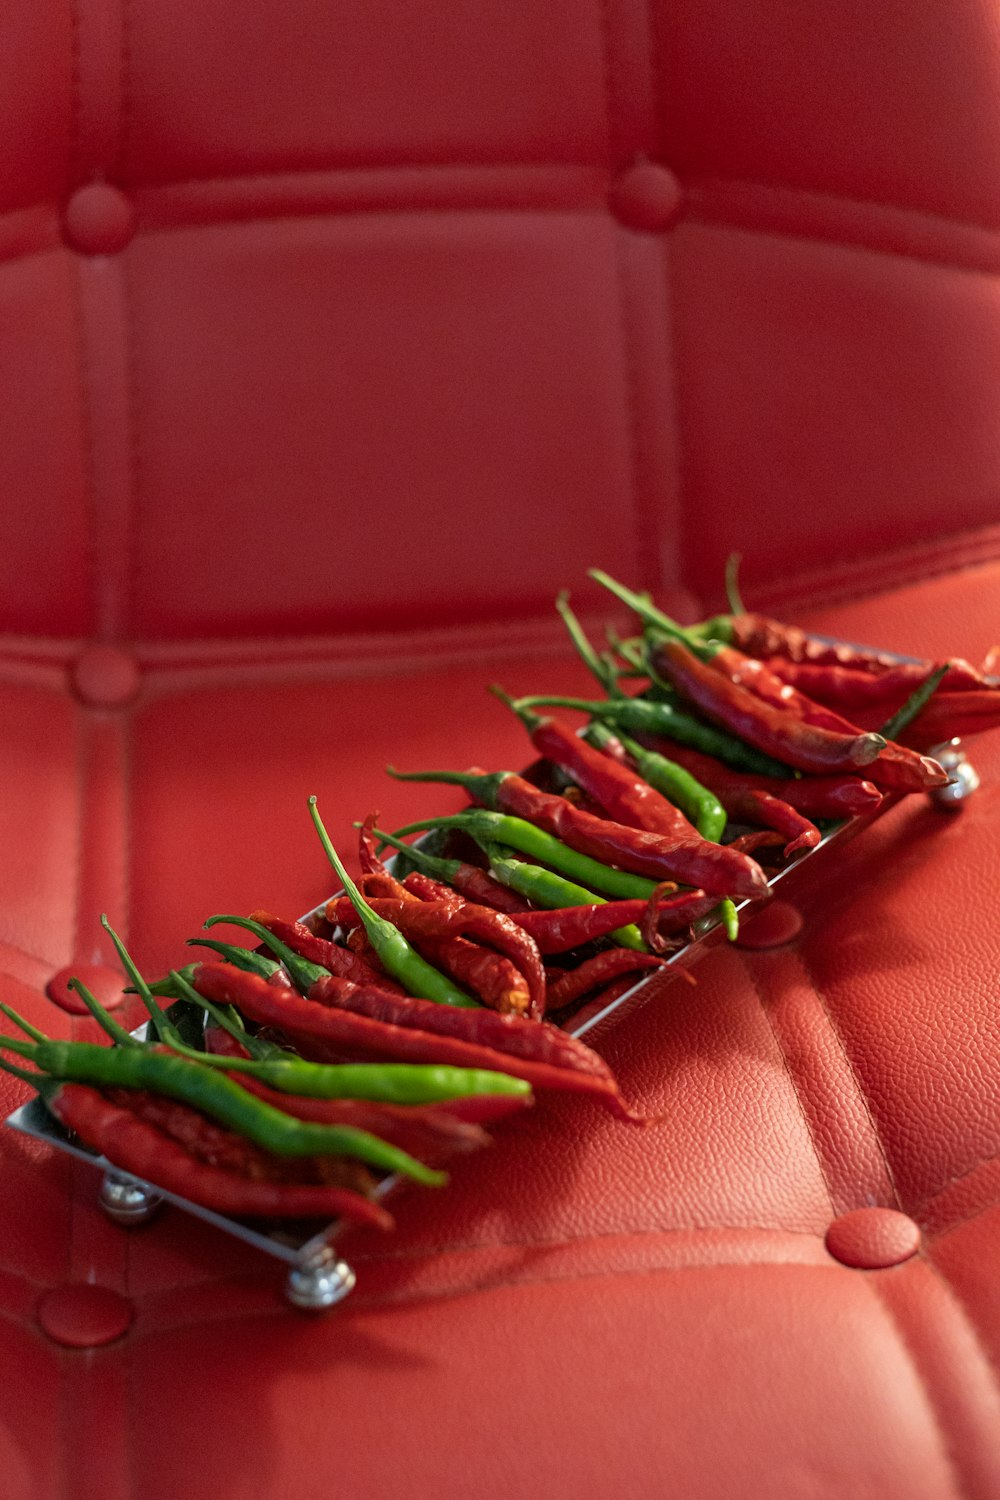 green chili on red leather textile